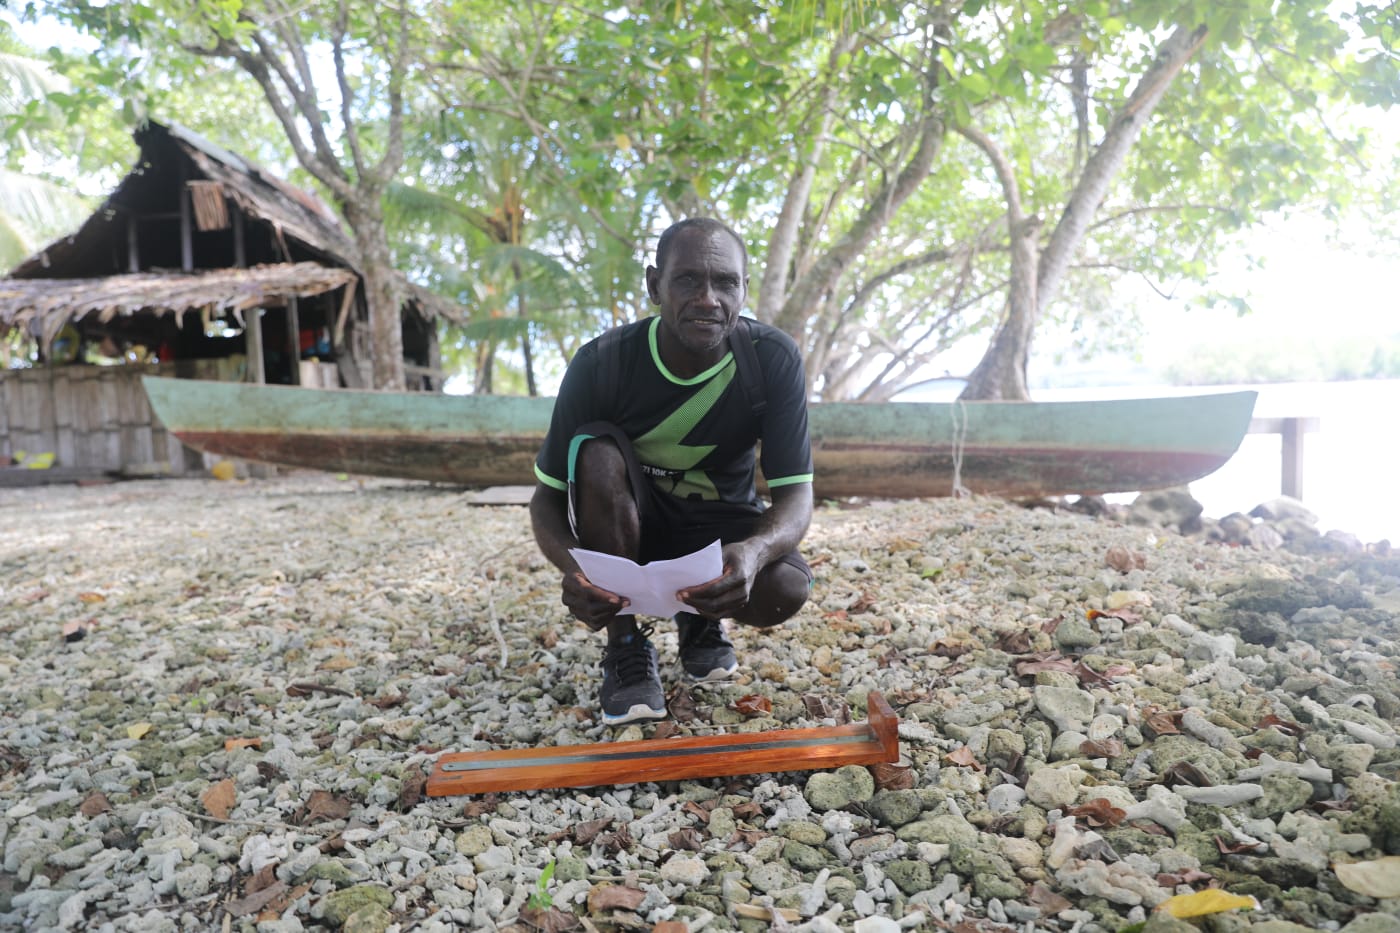 SeSe is a local fisherman collecting Spawning Potential Survey (SPS) data using the board WWF helped make for him. By measuring fish against the lengths on the board he is able to help manage the health of the reef for the future.